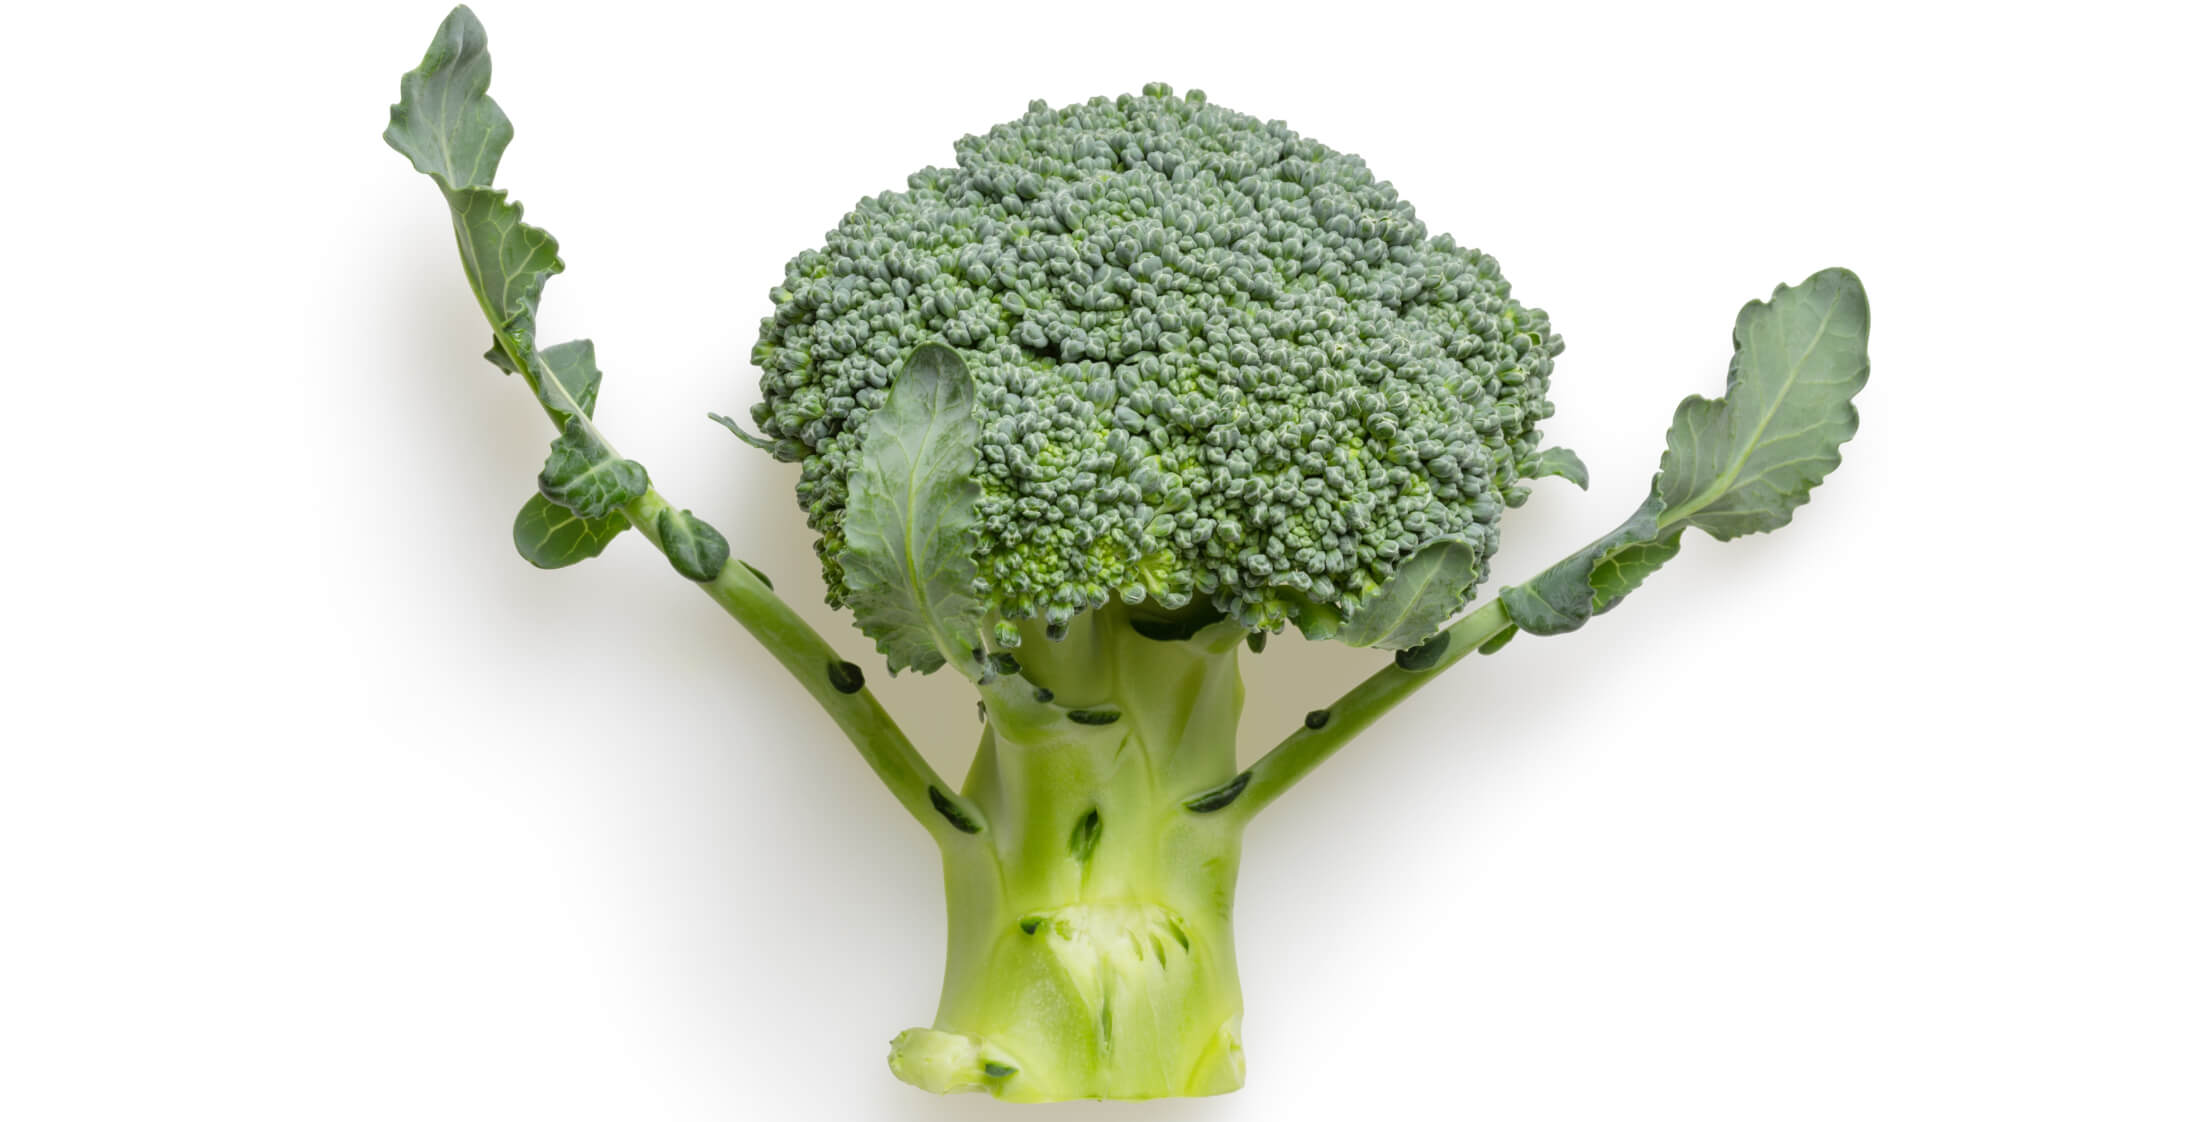 Image of Broccoli - sourced from Unsplash